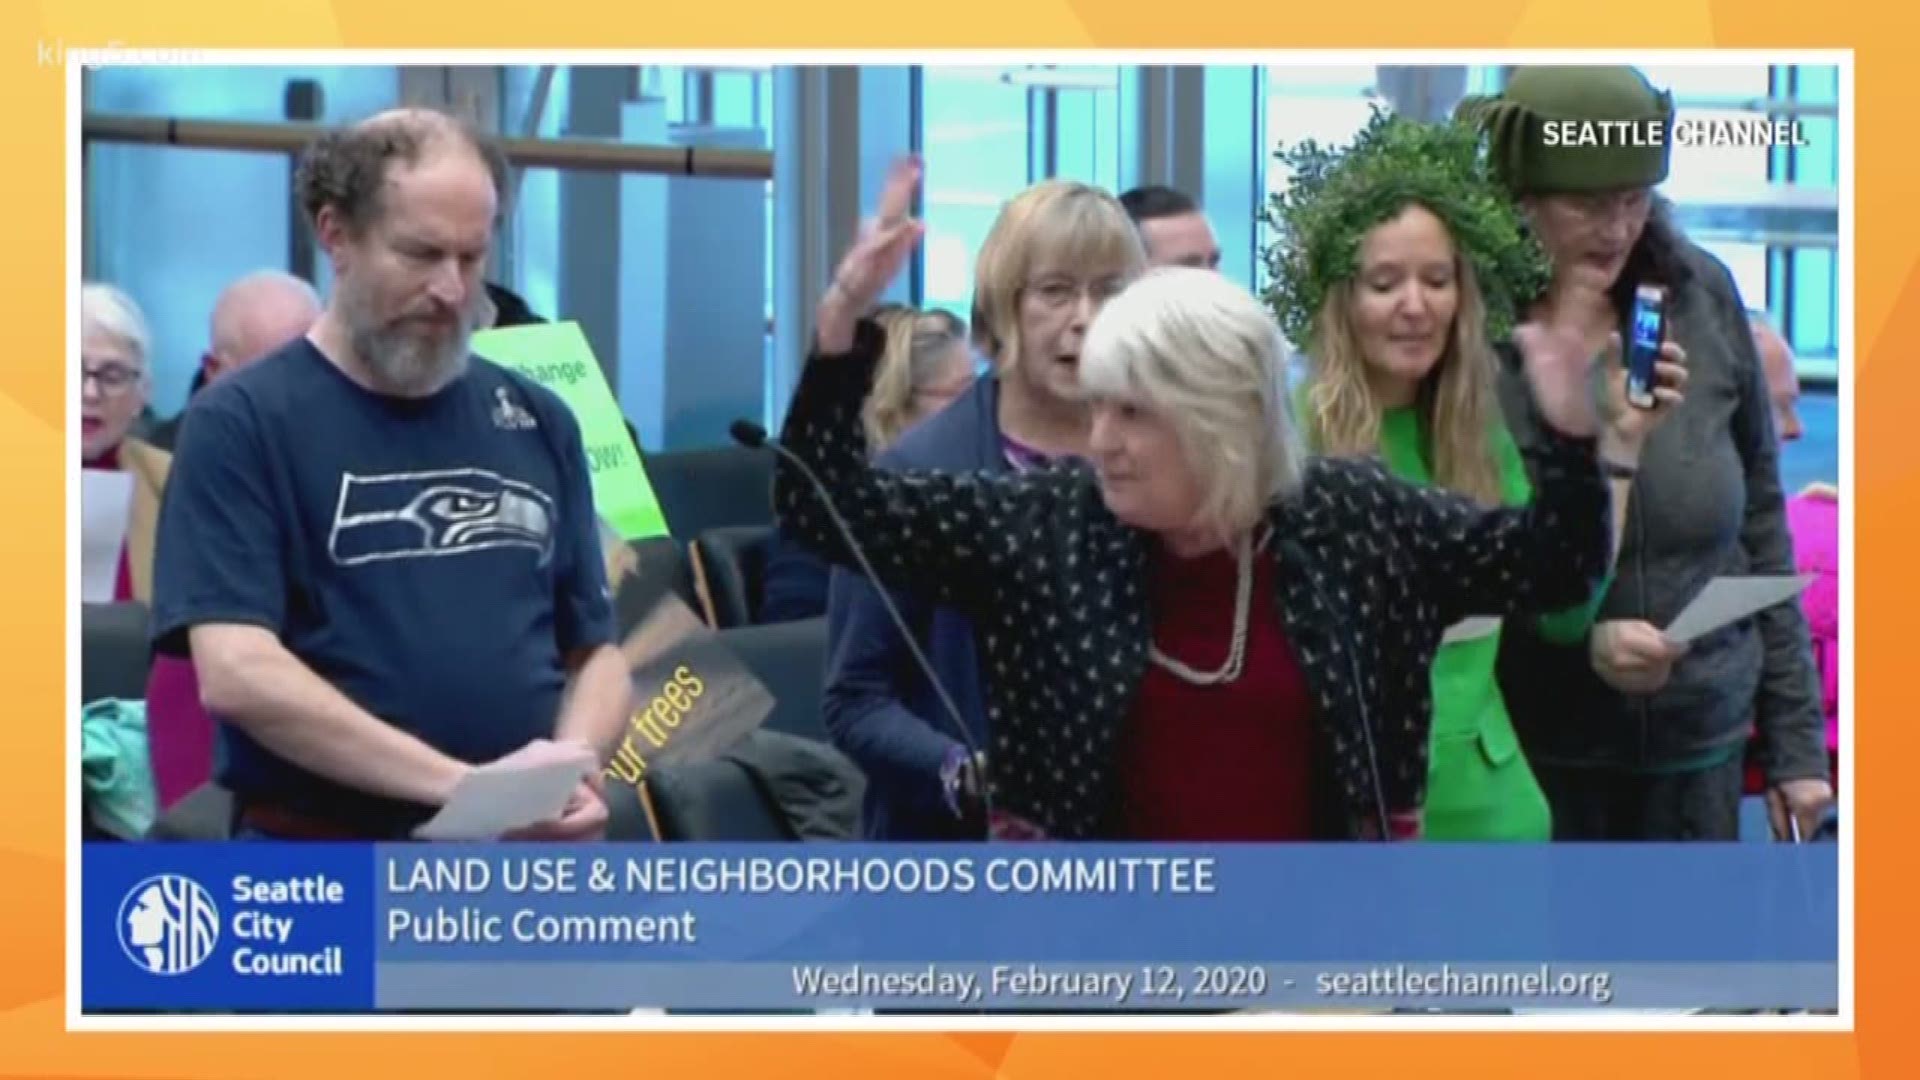 Seattle tree enthusiast Suzanne Grant led a group in song during public comment at a Land Use & Neighborhoods Committee meeting.